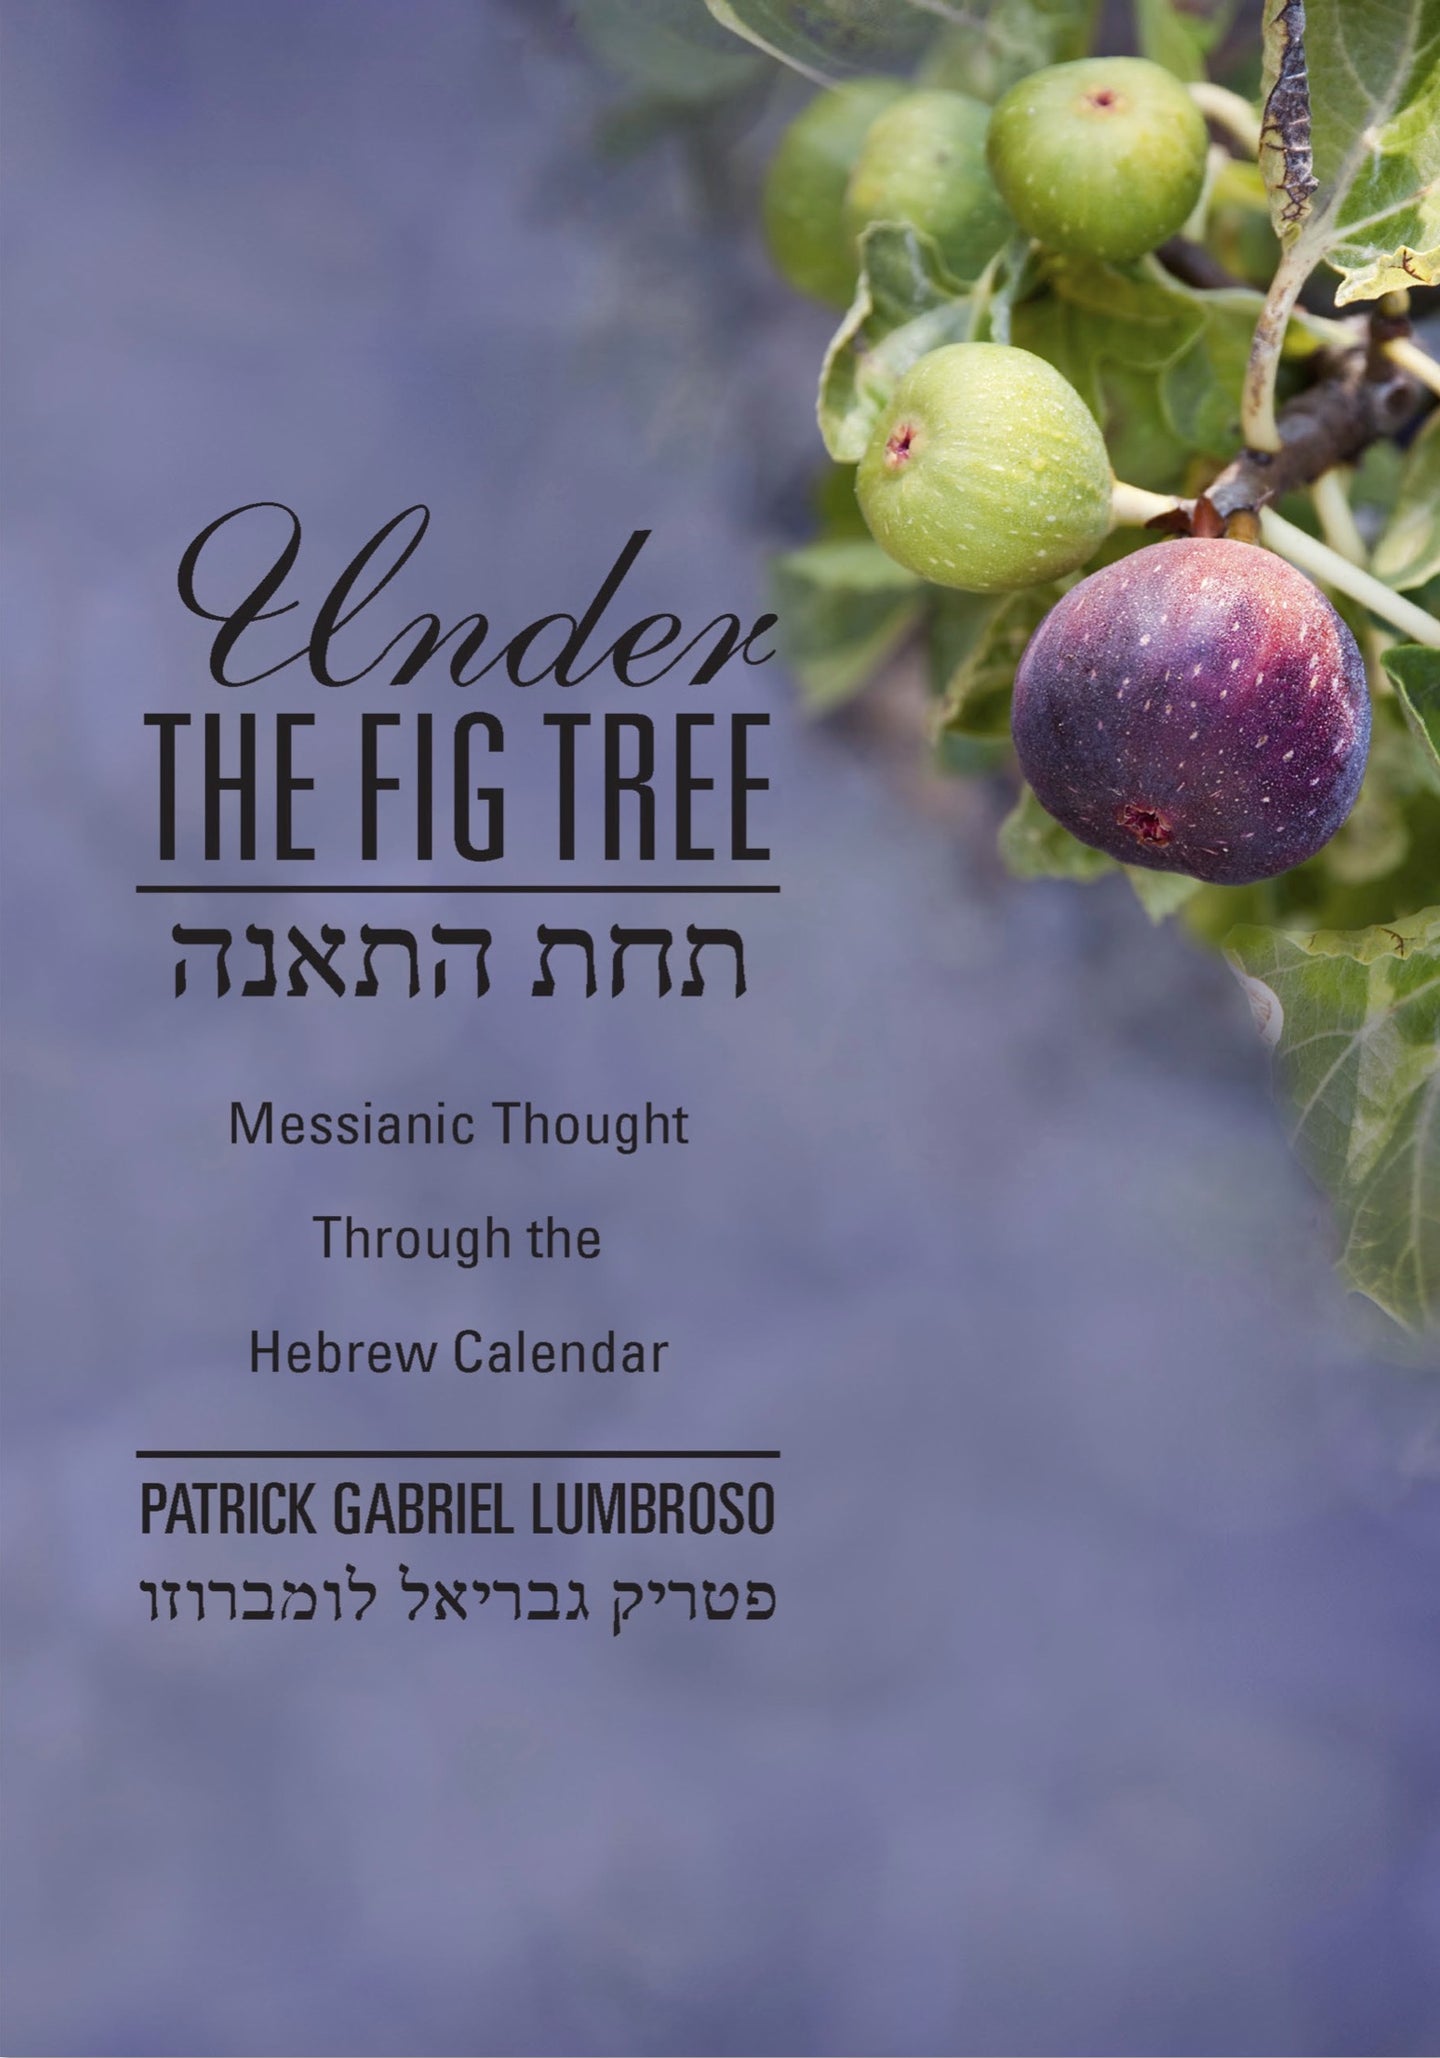 Under the Fig Tree: Messianic Thought Through the Hebrew Calendar by Patrick Gabriel Lumbroso